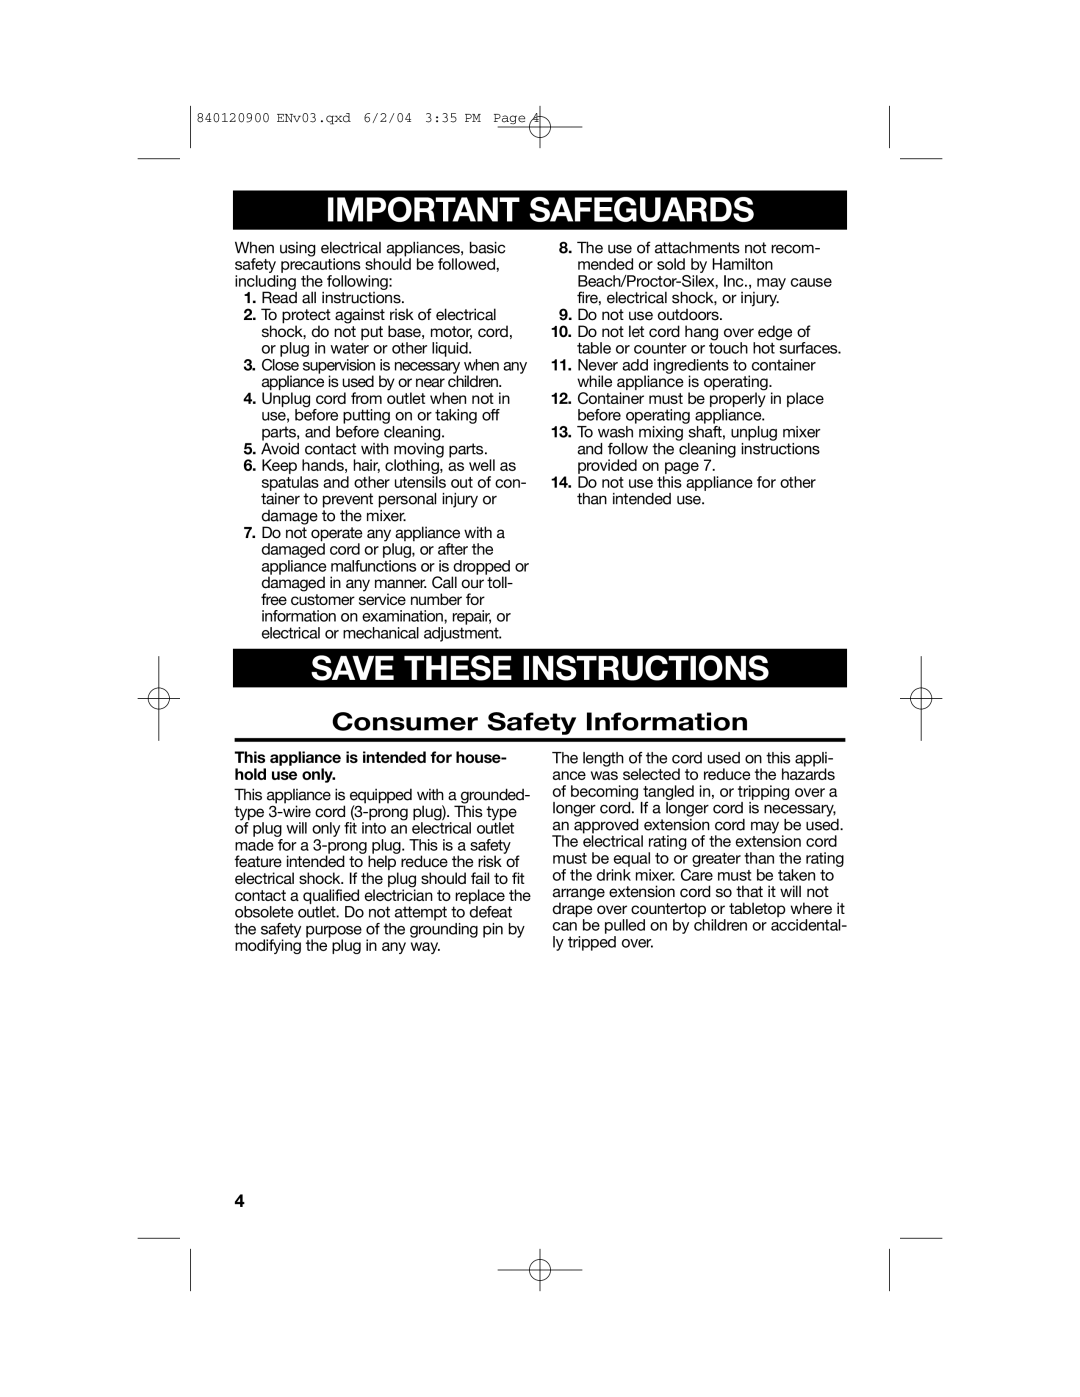 Hamilton Beach ALL-METAL DRINK MIXER manual Consumer Safety Information, Important Safeguards, Save These Instructions 